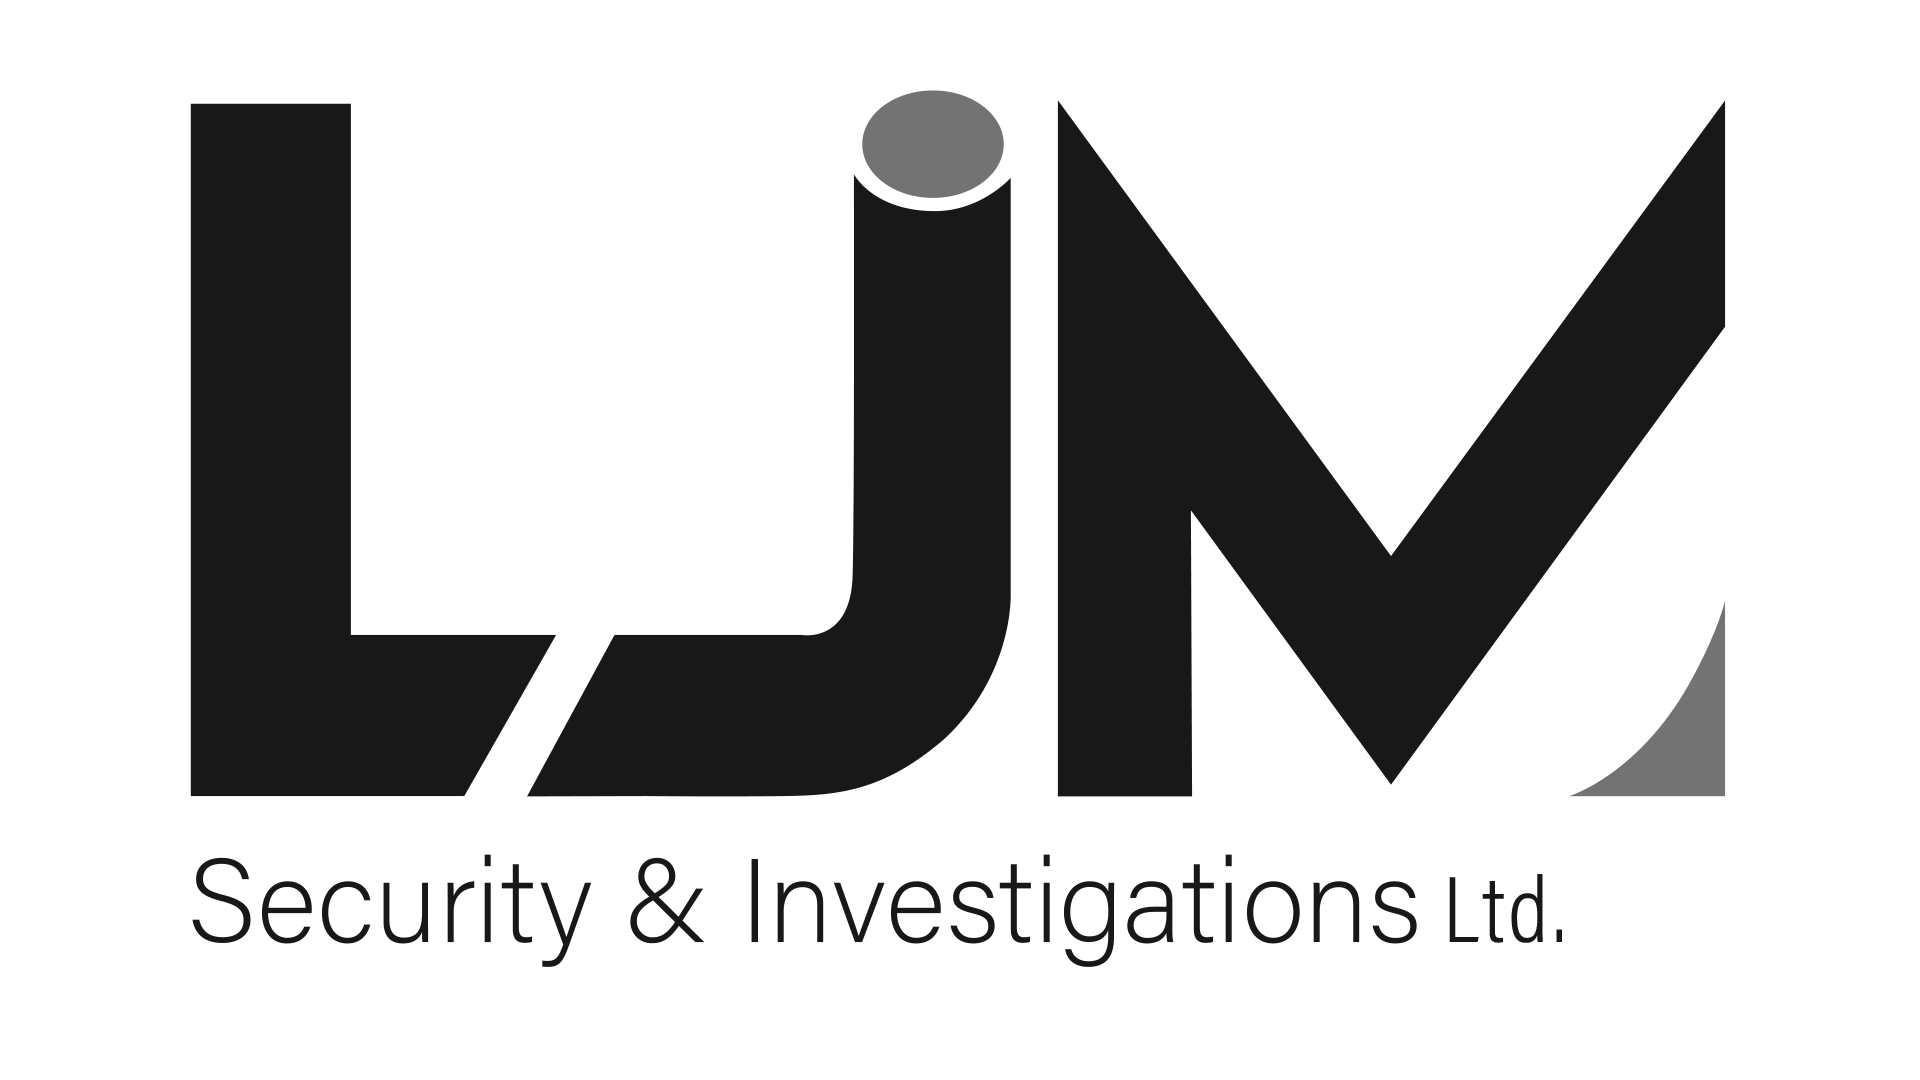 We're sponsored by LJM Security & Investigations 